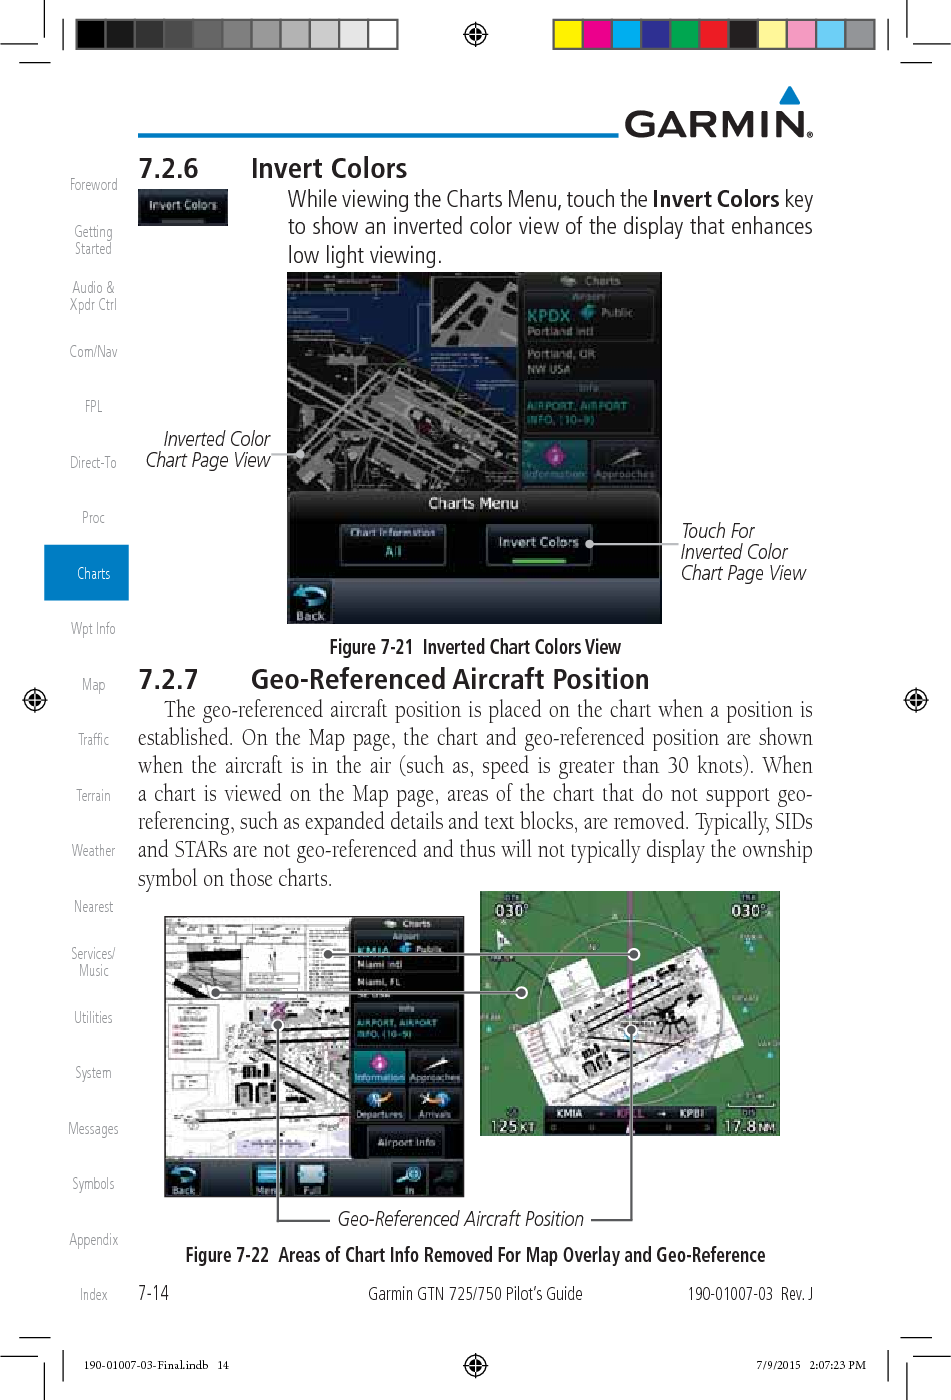 7-14Garmin GTN 725/750 Pilot’s Guide190-01007-03  Rev. JForewordGetting StartedAudio &amp;  Xpdr CtrlCom/NavFPLDirect-ToProcChartsWpt InfoMapTrafﬁcTerrainWeatherNearestServices/ MusicUtilitiesSystemMessagesSymbolsAppendixIndex7.2.6 Invert Colors    While viewing the Charts Menu, touch the Invert Colors key to show an inverted color view of the display that enhances low light viewing. Inverted Color  Chart Page ViewTouch For Inverted Color  Chart Page ViewFigure 7-21  Inverted Chart Colors View7.2.7 Geo-Referenced Aircraft PositionThe geo-referenced aircraft position is placed on the chart when a position is established. On the Map page, the chart and geo-referenced position are shown when the aircraft is in the air (such as, speed is greater than 30 knots). When a chart is viewed on the Map page, areas of the chart that do not support geo-referencing, such as expanded details and text blocks, are removed. Typically, SIDs and STARs are not geo-referenced and thus will not typically display the ownship symbol on those charts. Geo-Referenced Aircraft PositionFigure 7-22  Areas of Chart Info Removed For Map Overlay and Geo-Reference190-01007-03-Final.indb   14 7/9/2015   2:07:23 PM